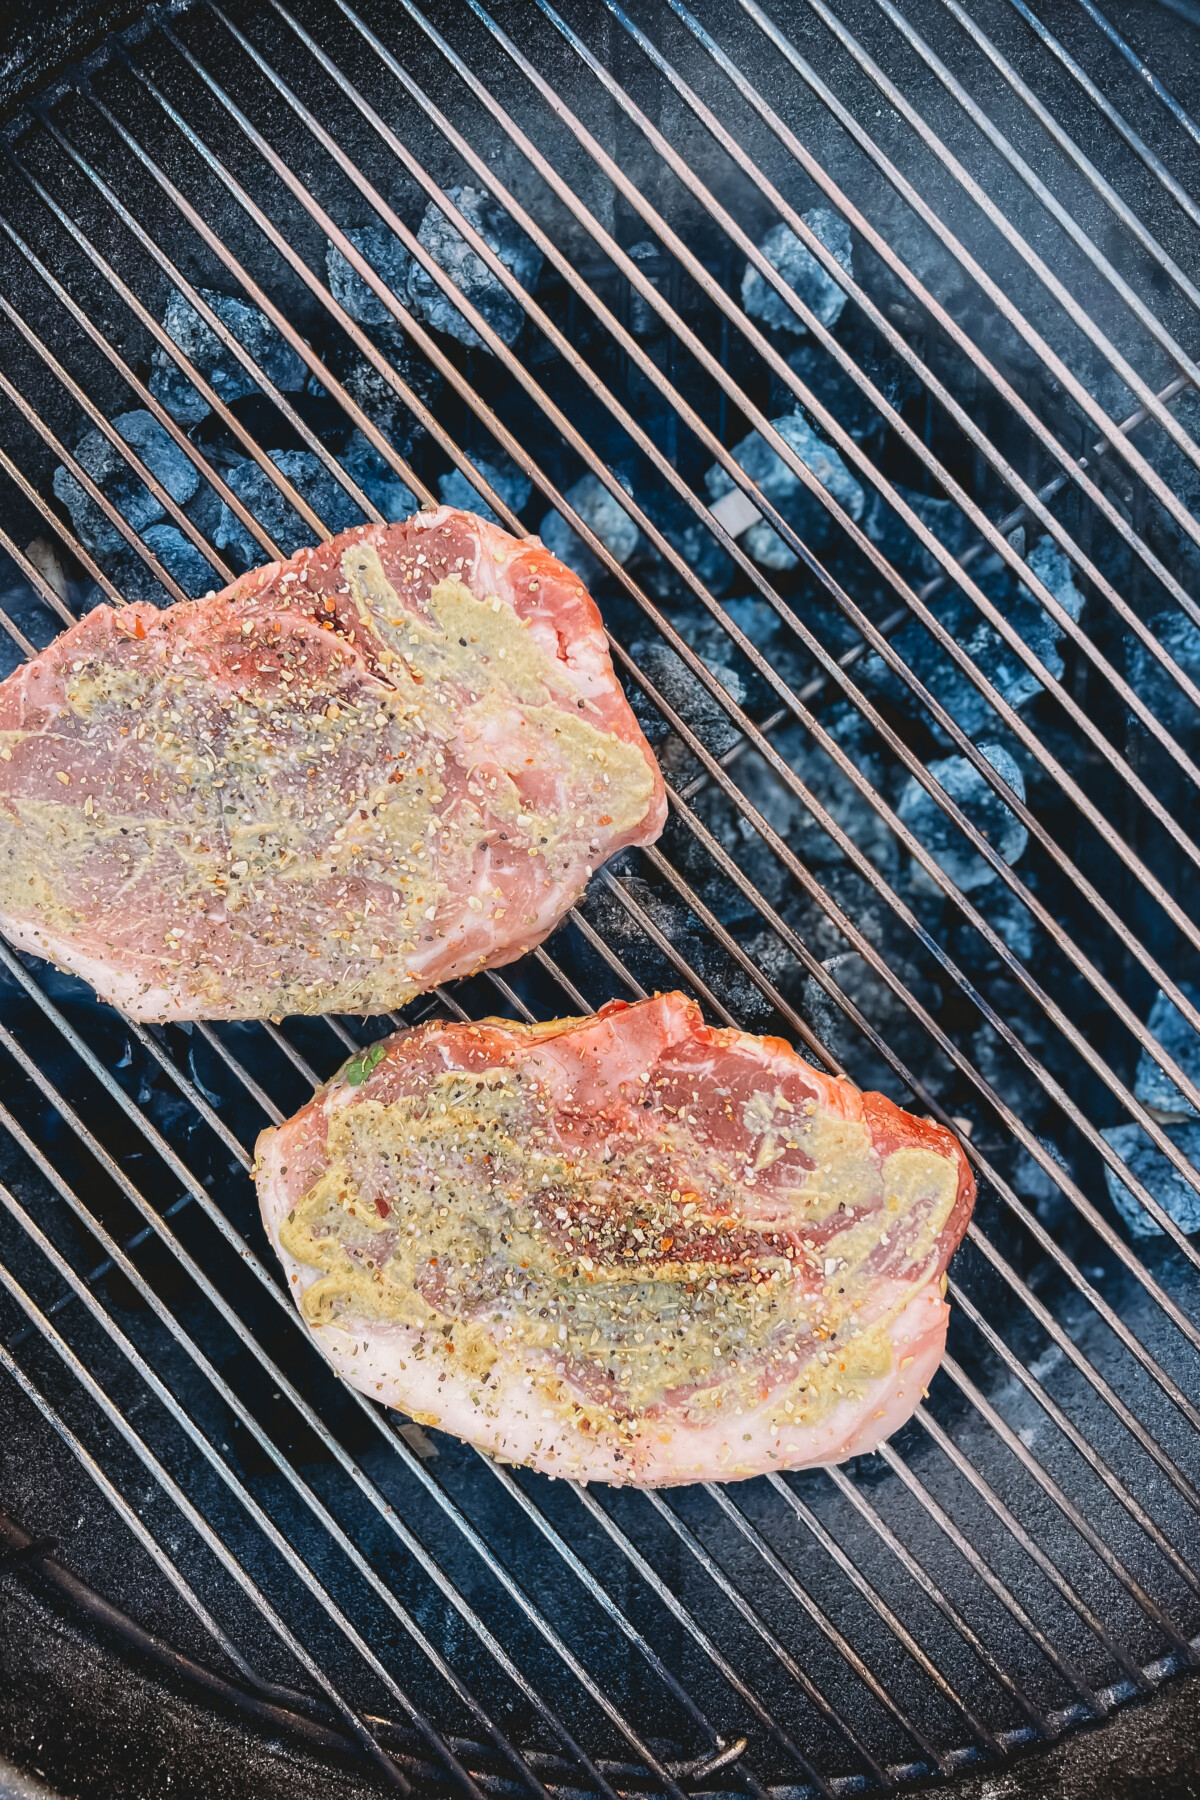 2 pork chops rubbed with mustard and spices on a grill.